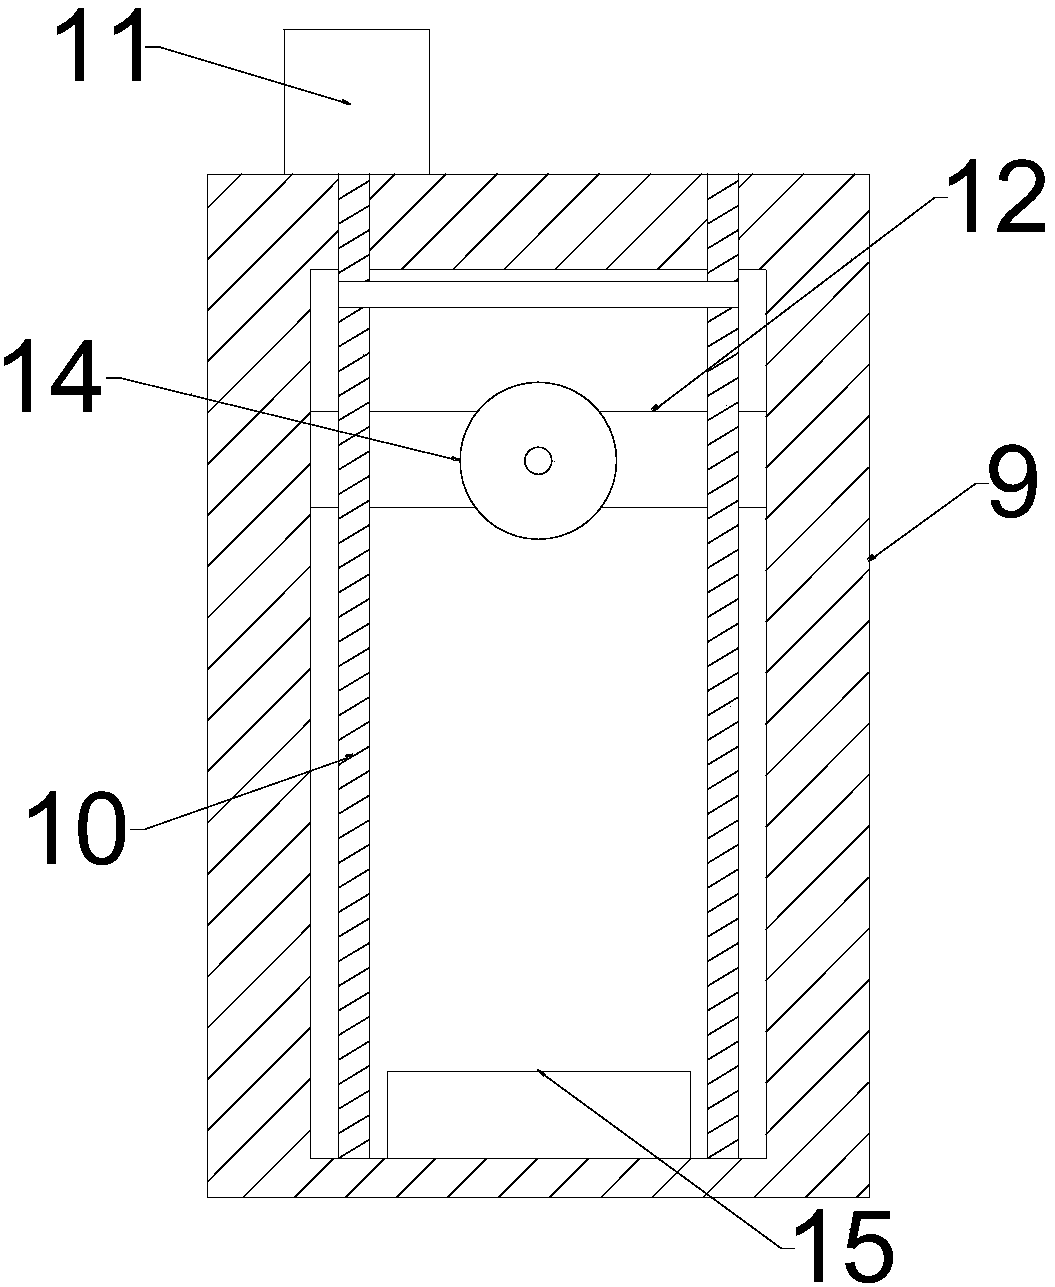 Cleaning and grinding device for building wall surface